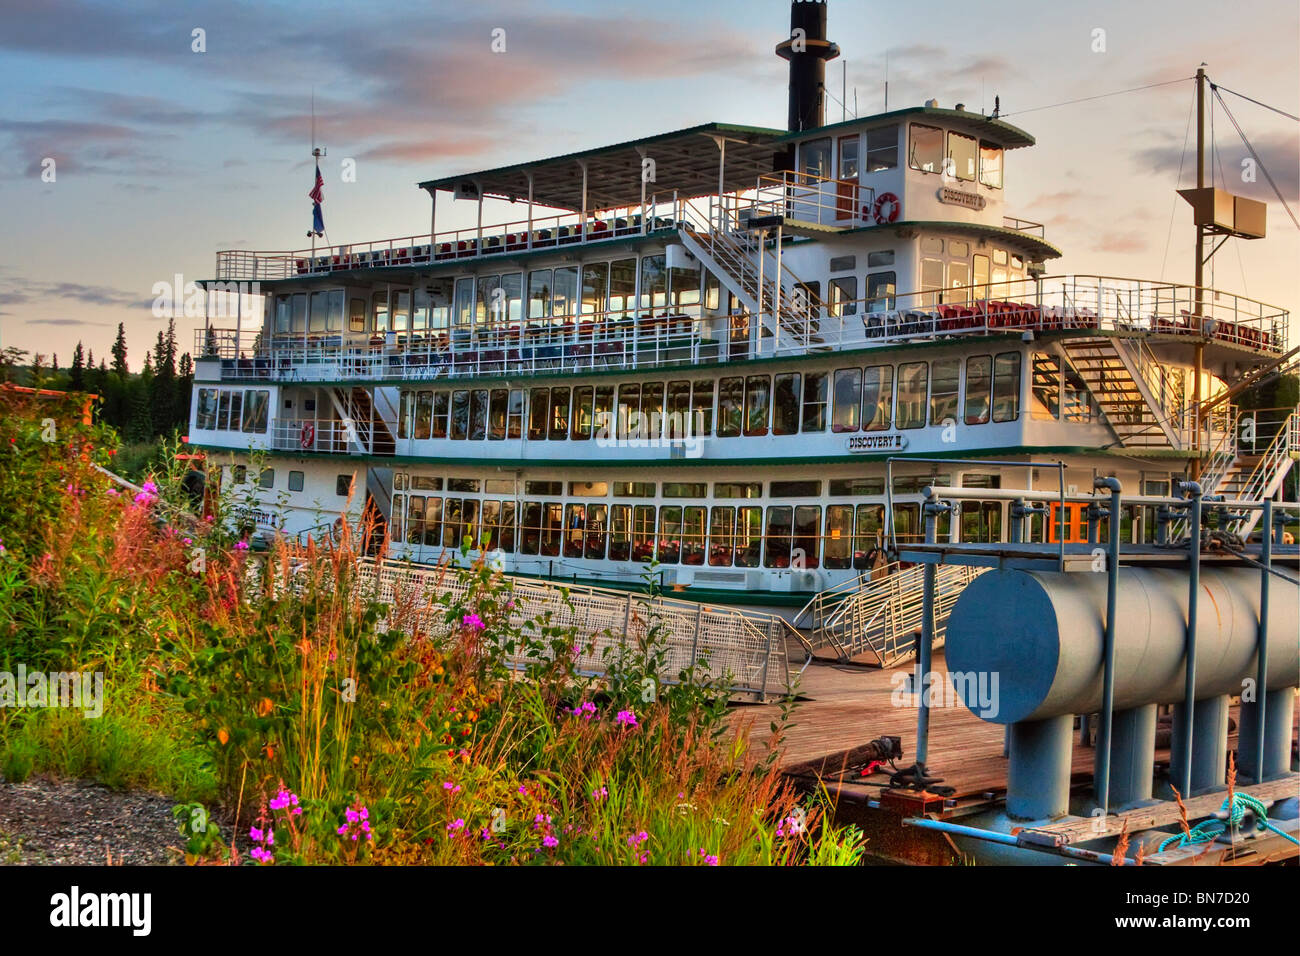 Riverboat Discovery docked on Chena River at sunset, Fairbanks, Alaska, HDR image Stock Photo